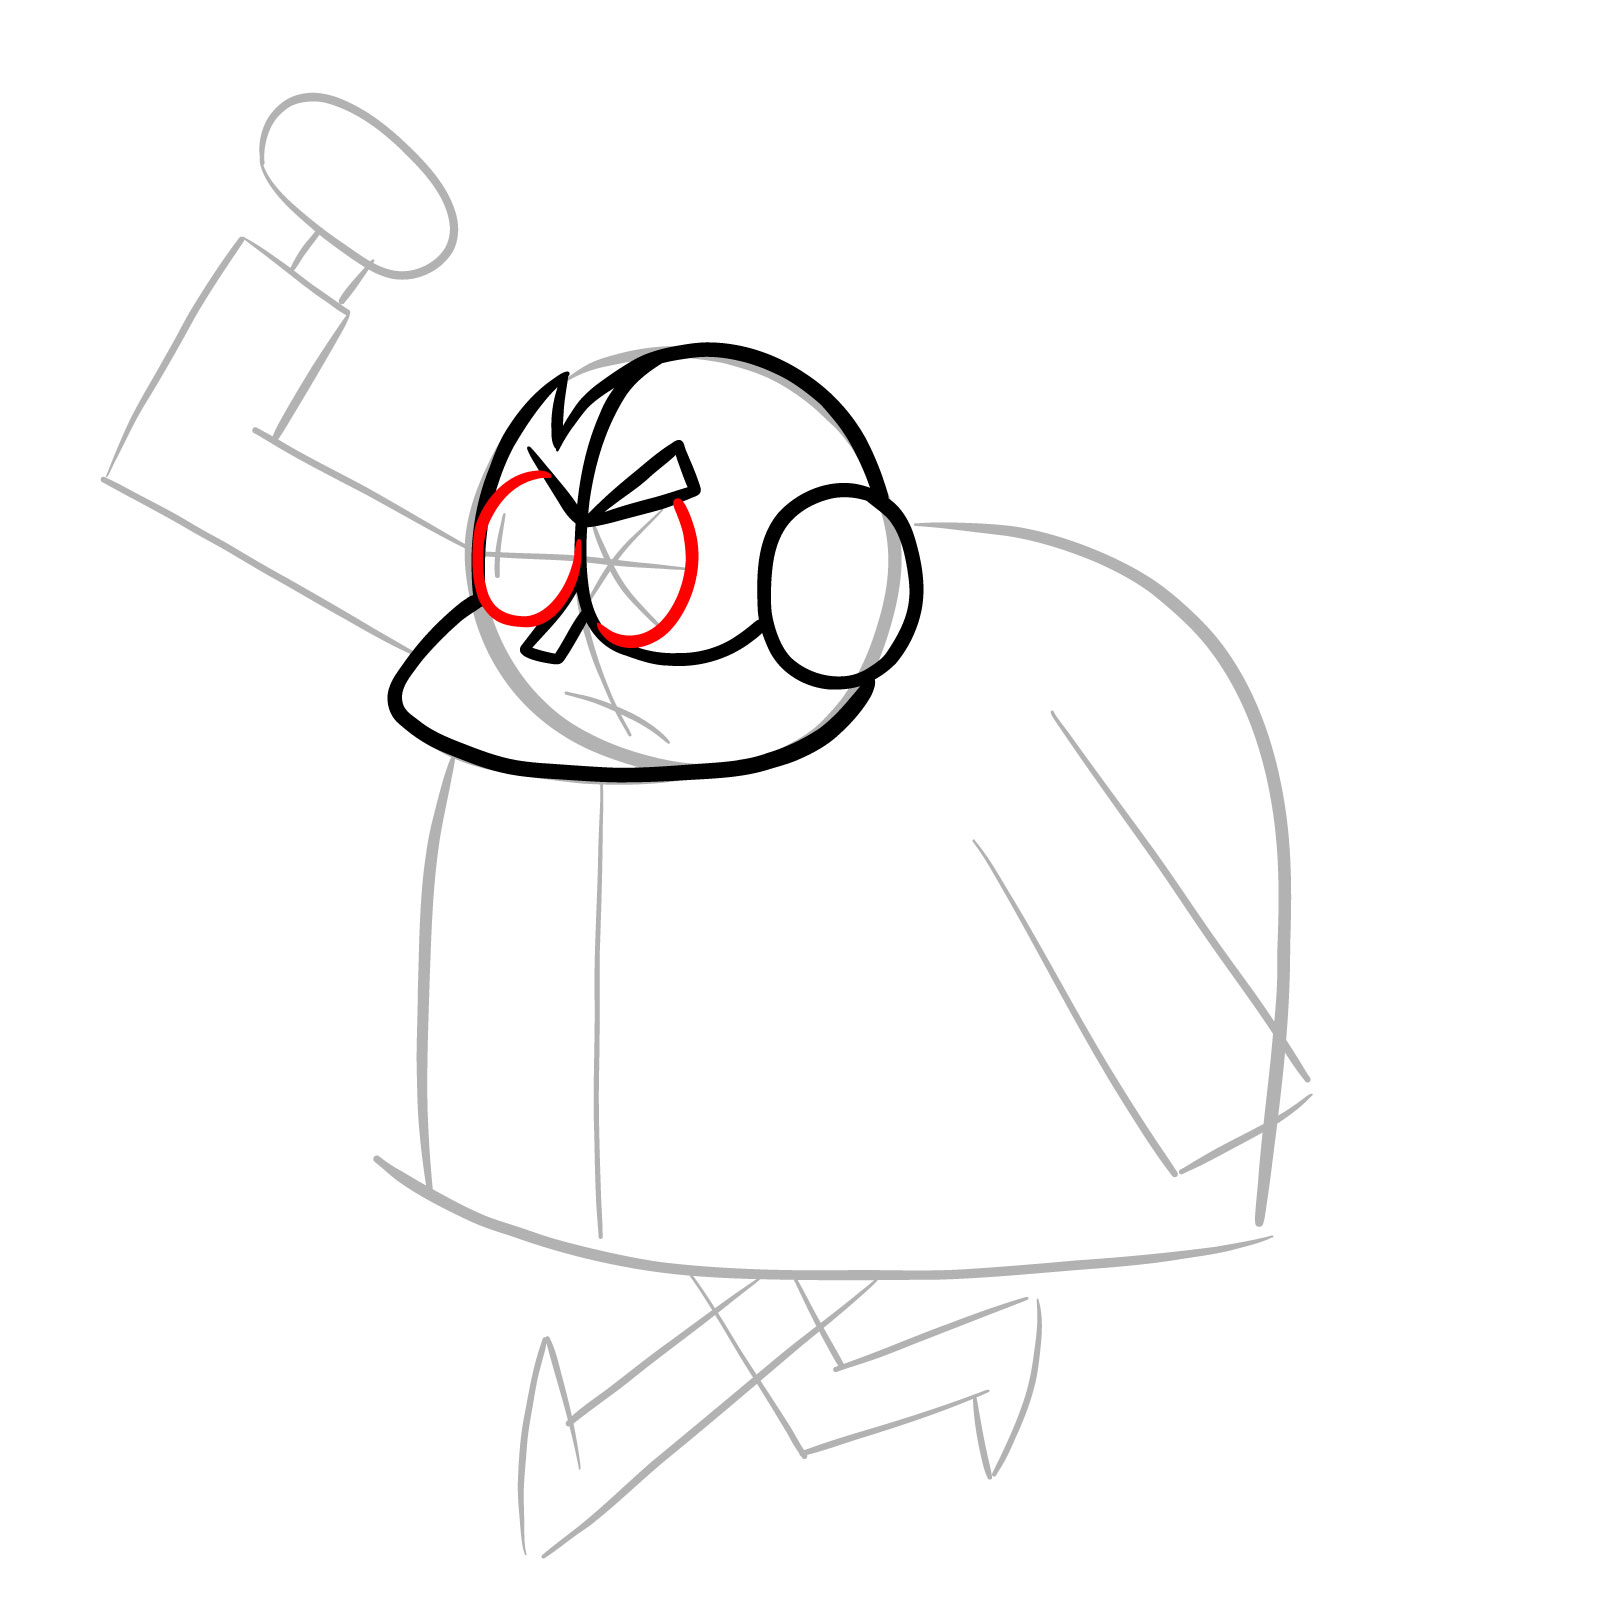 How to draw Lord Boxman from OK K.O.! - step 08